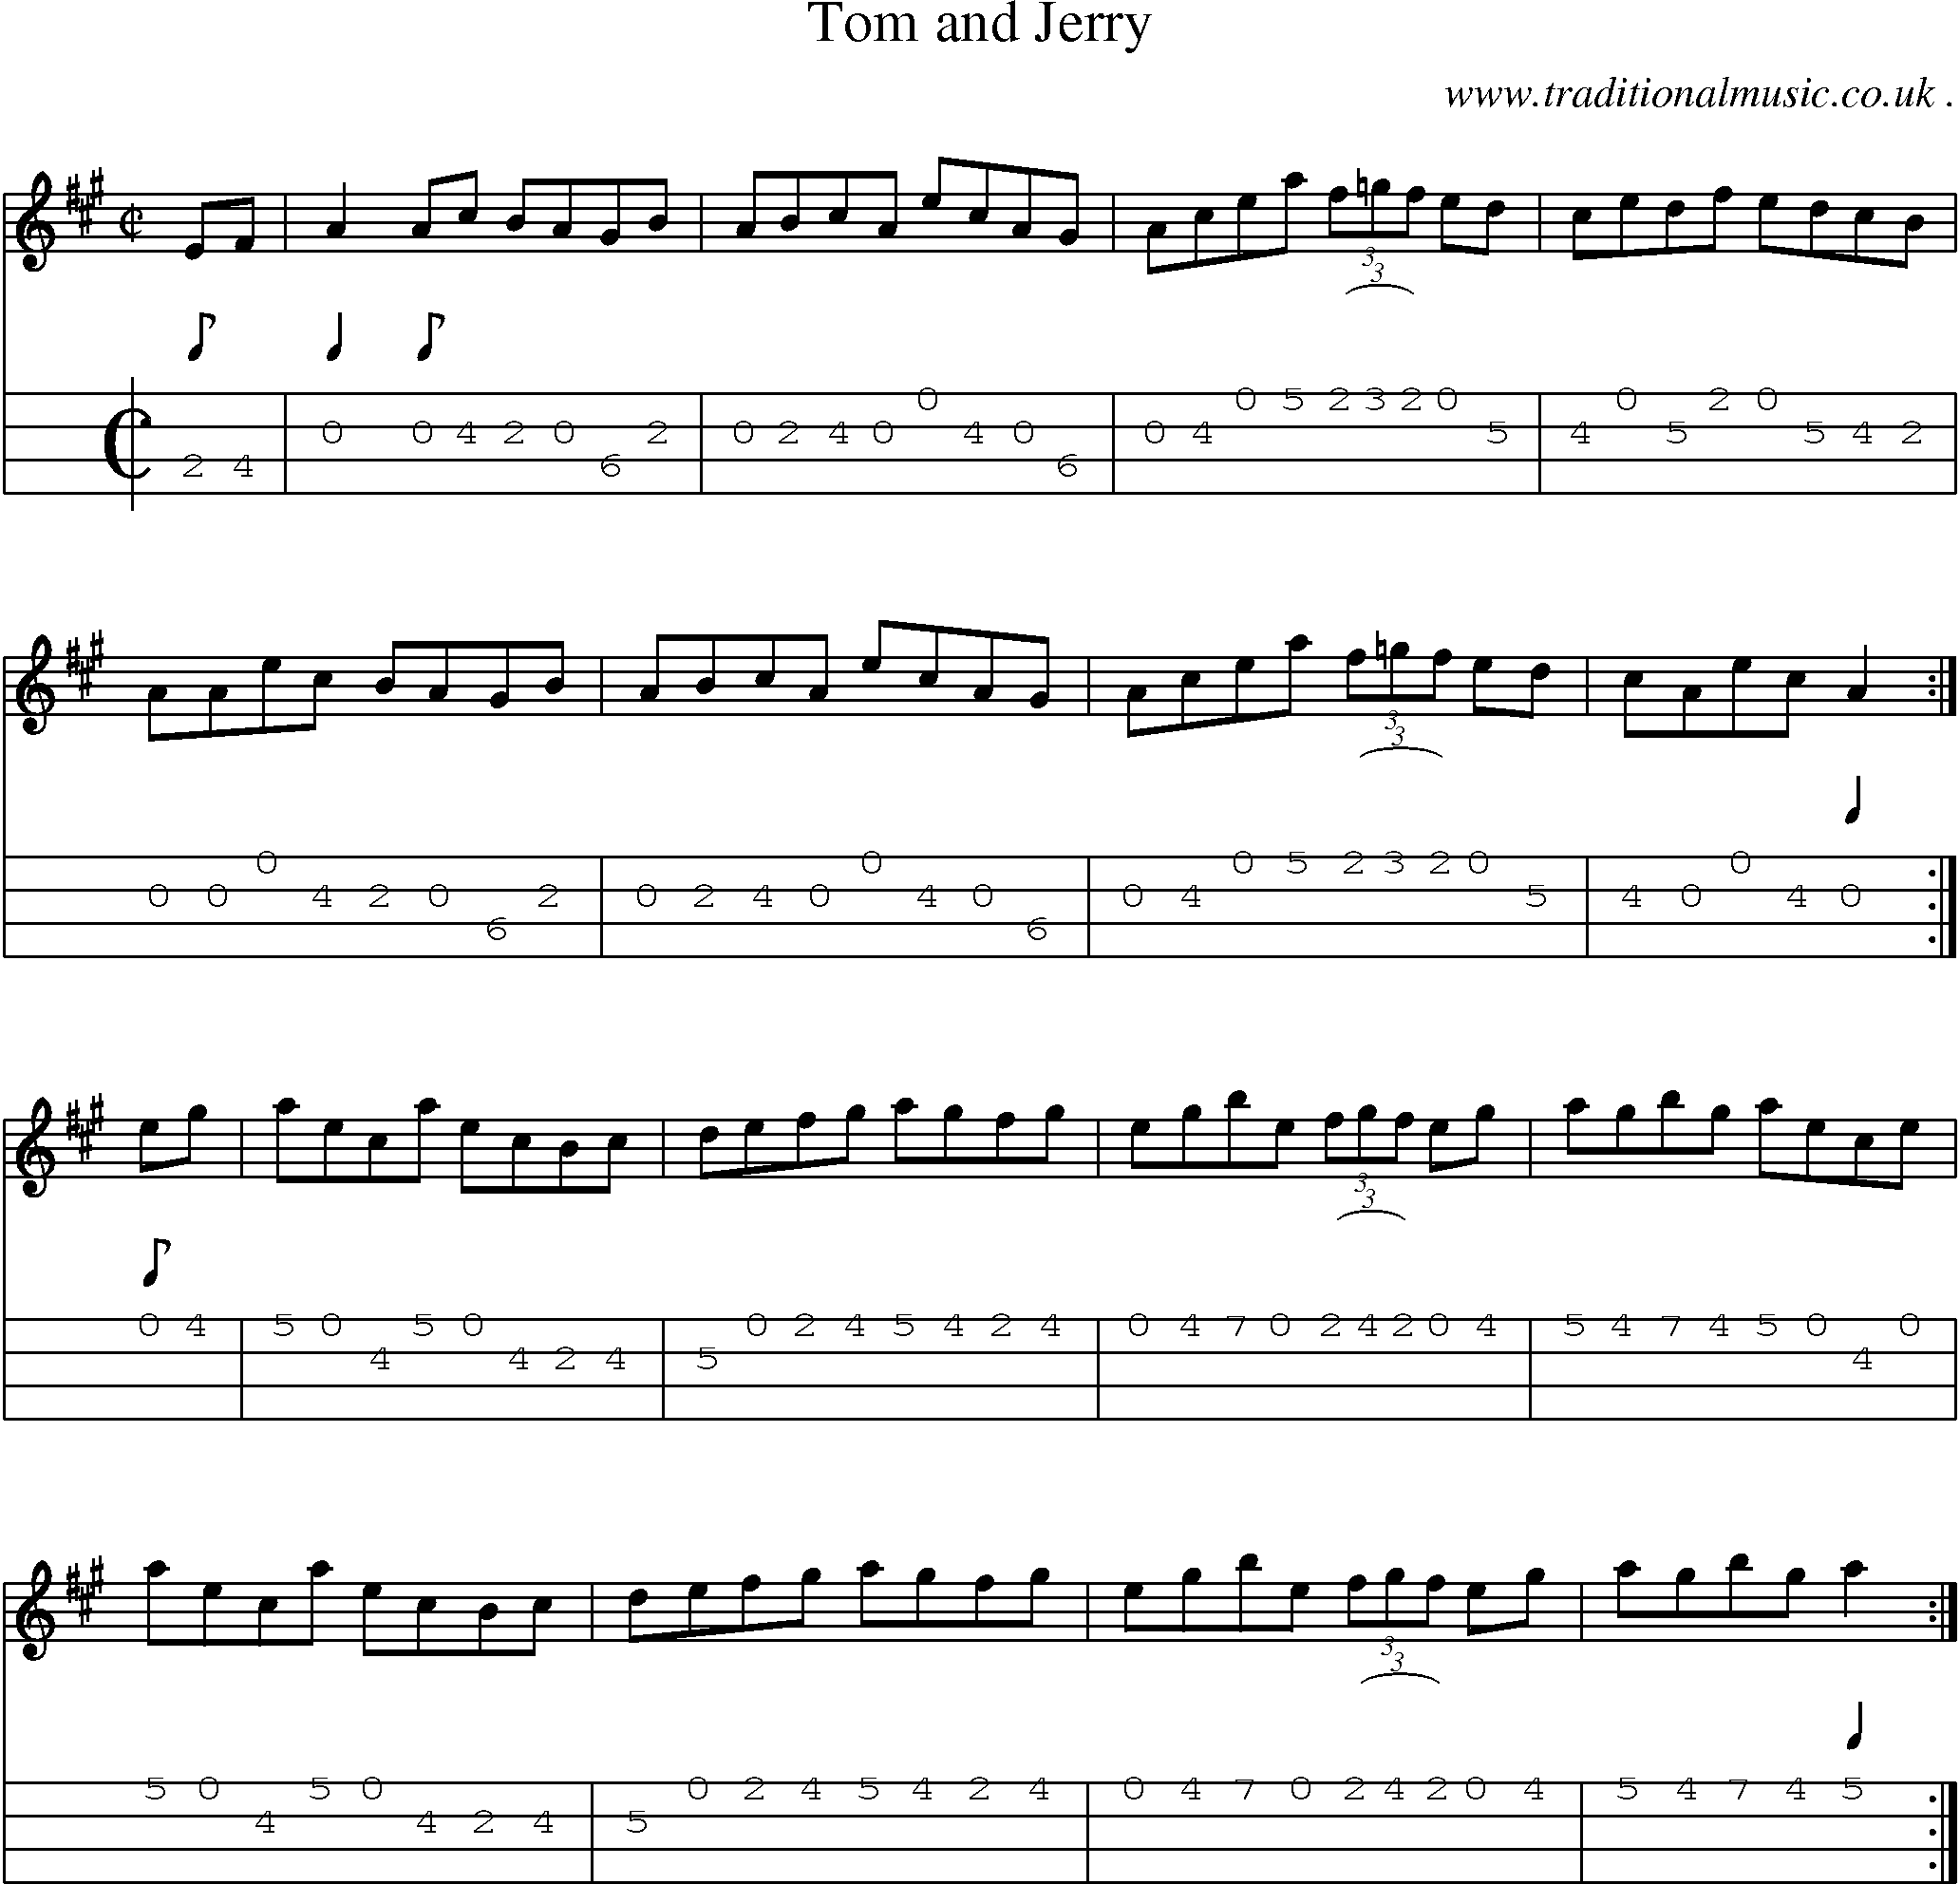 Sheet-music  score, Chords and Mandolin Tabs for Tom And Jerry